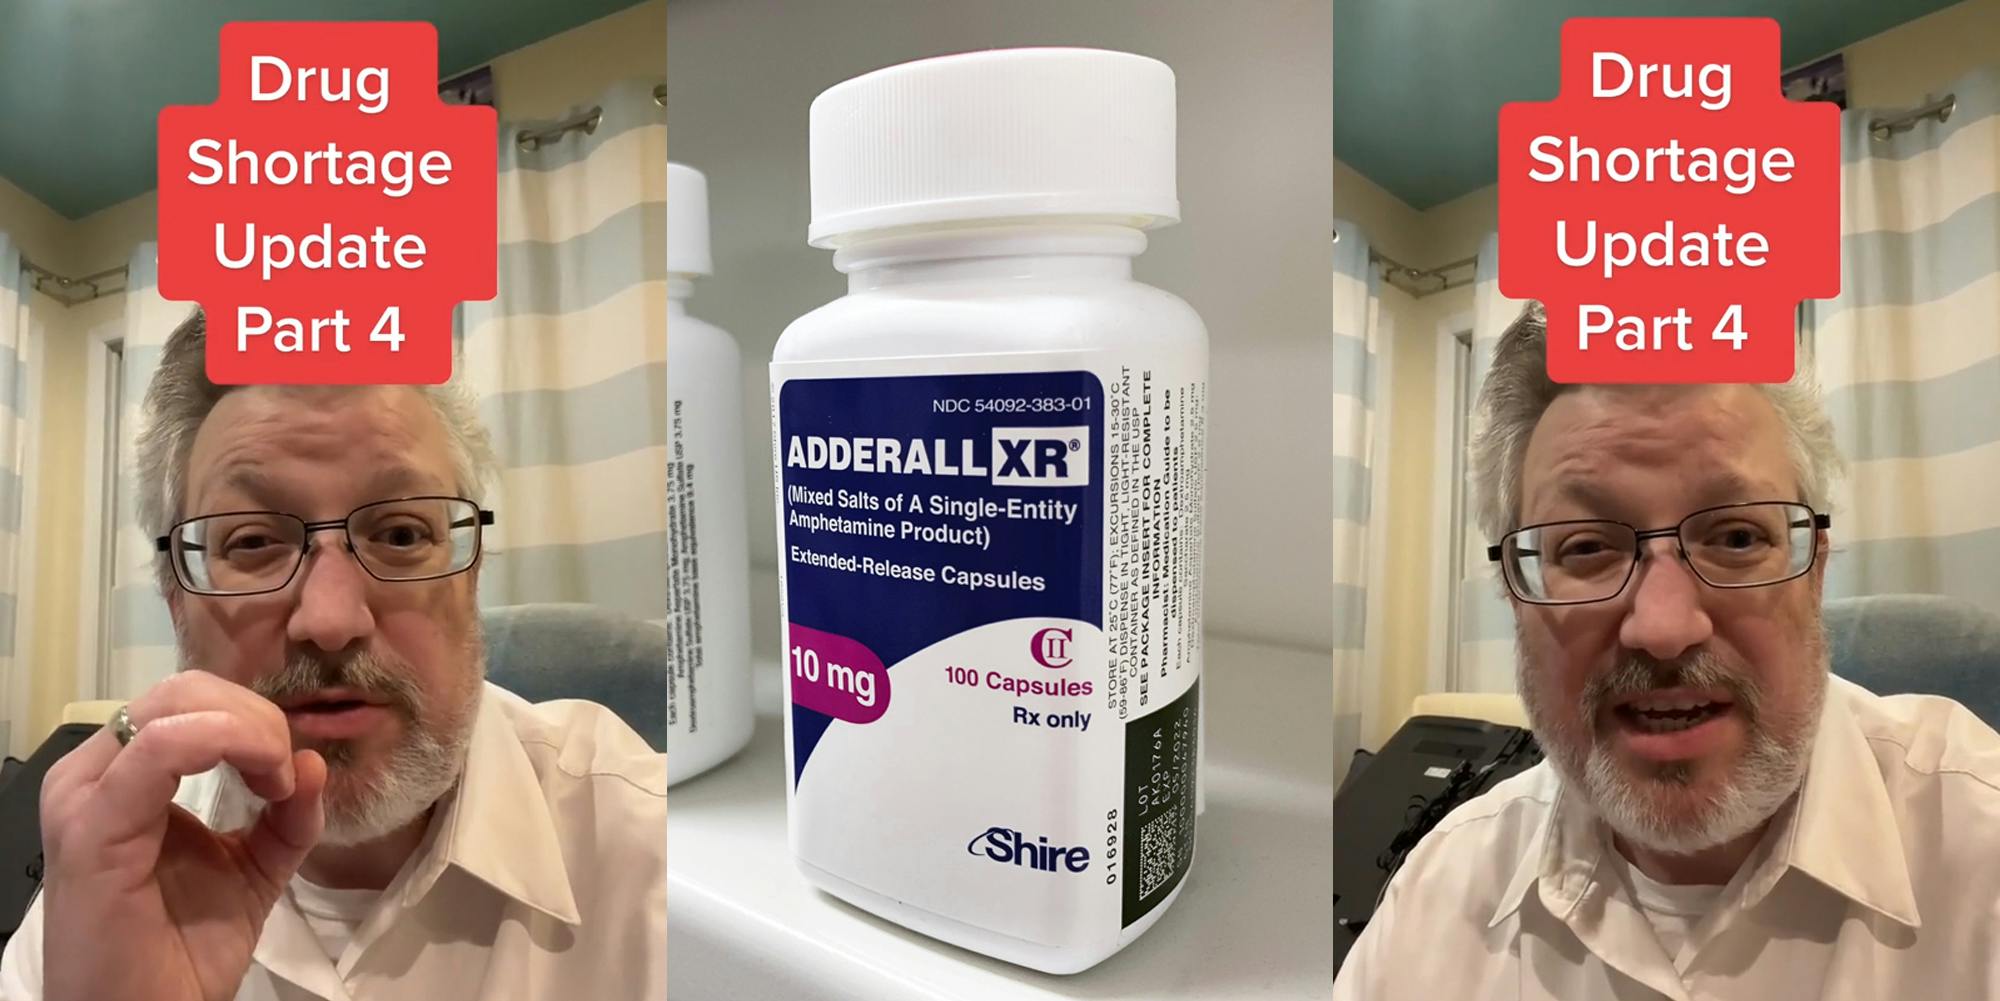 pharmacist speaking holding up hand making zero with caption "Drug Shortage Update Part 4" (l) Adderall ADHD medication in bottle on shelf (c) pharmacist speaking with caption "Drug Shortage Update Part 4" (r)